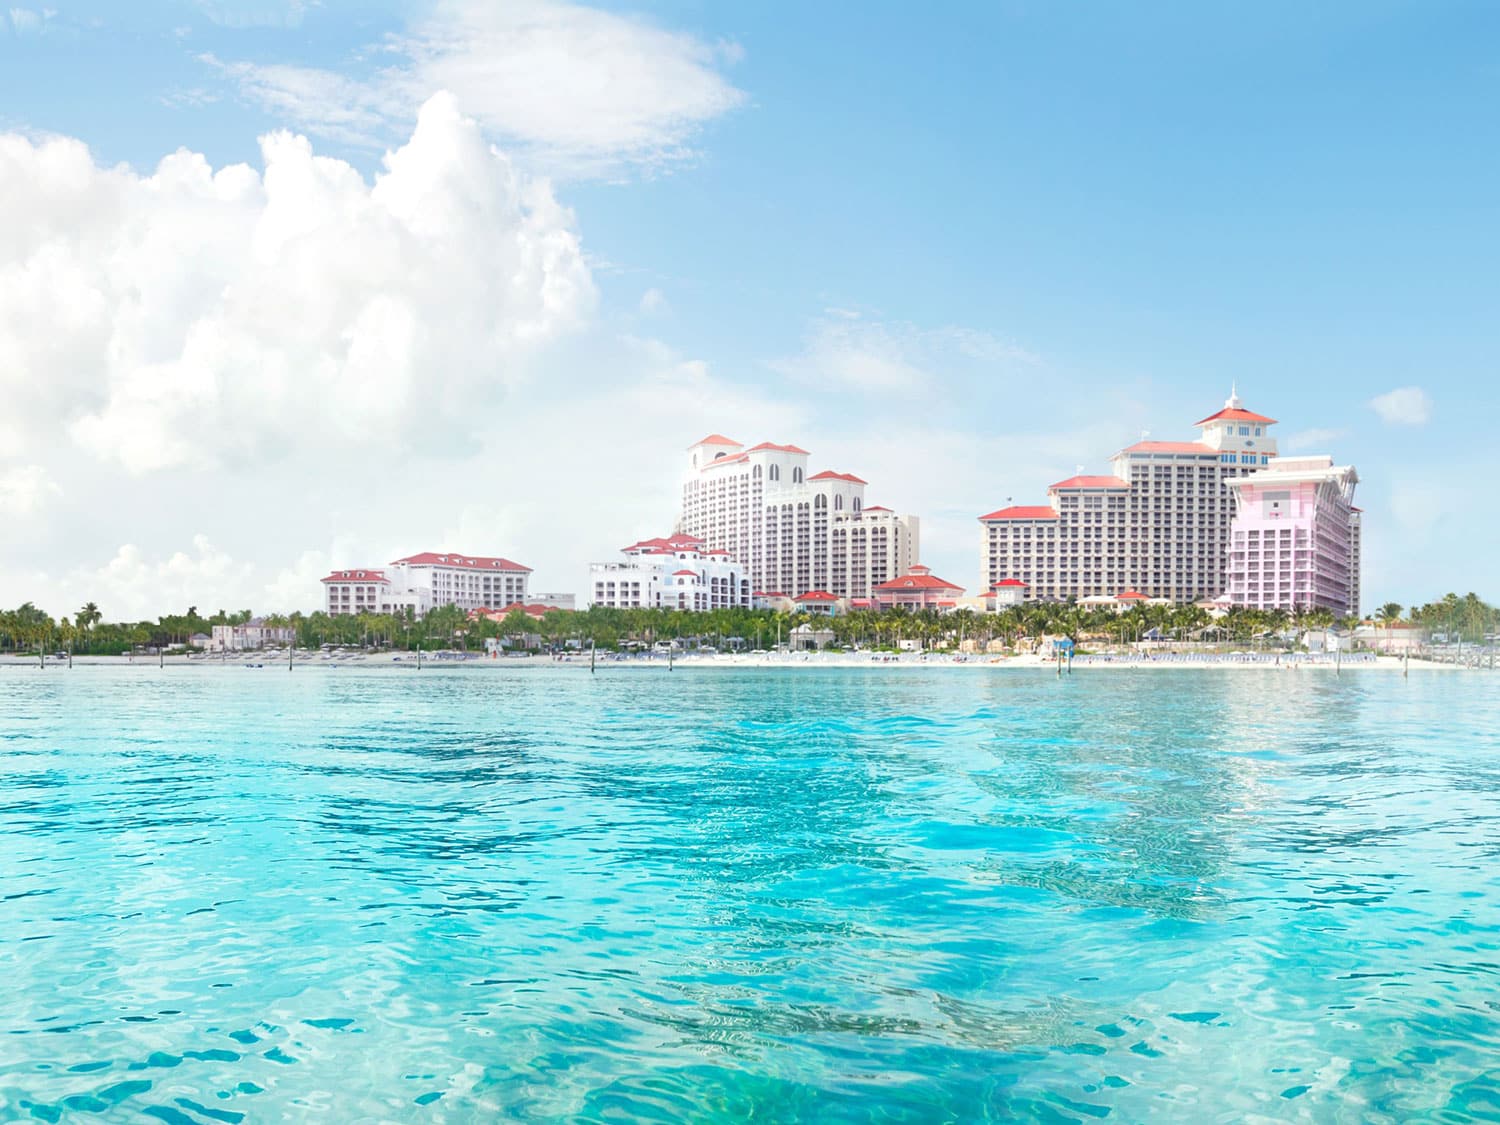 A view of Baha Mar from the water.